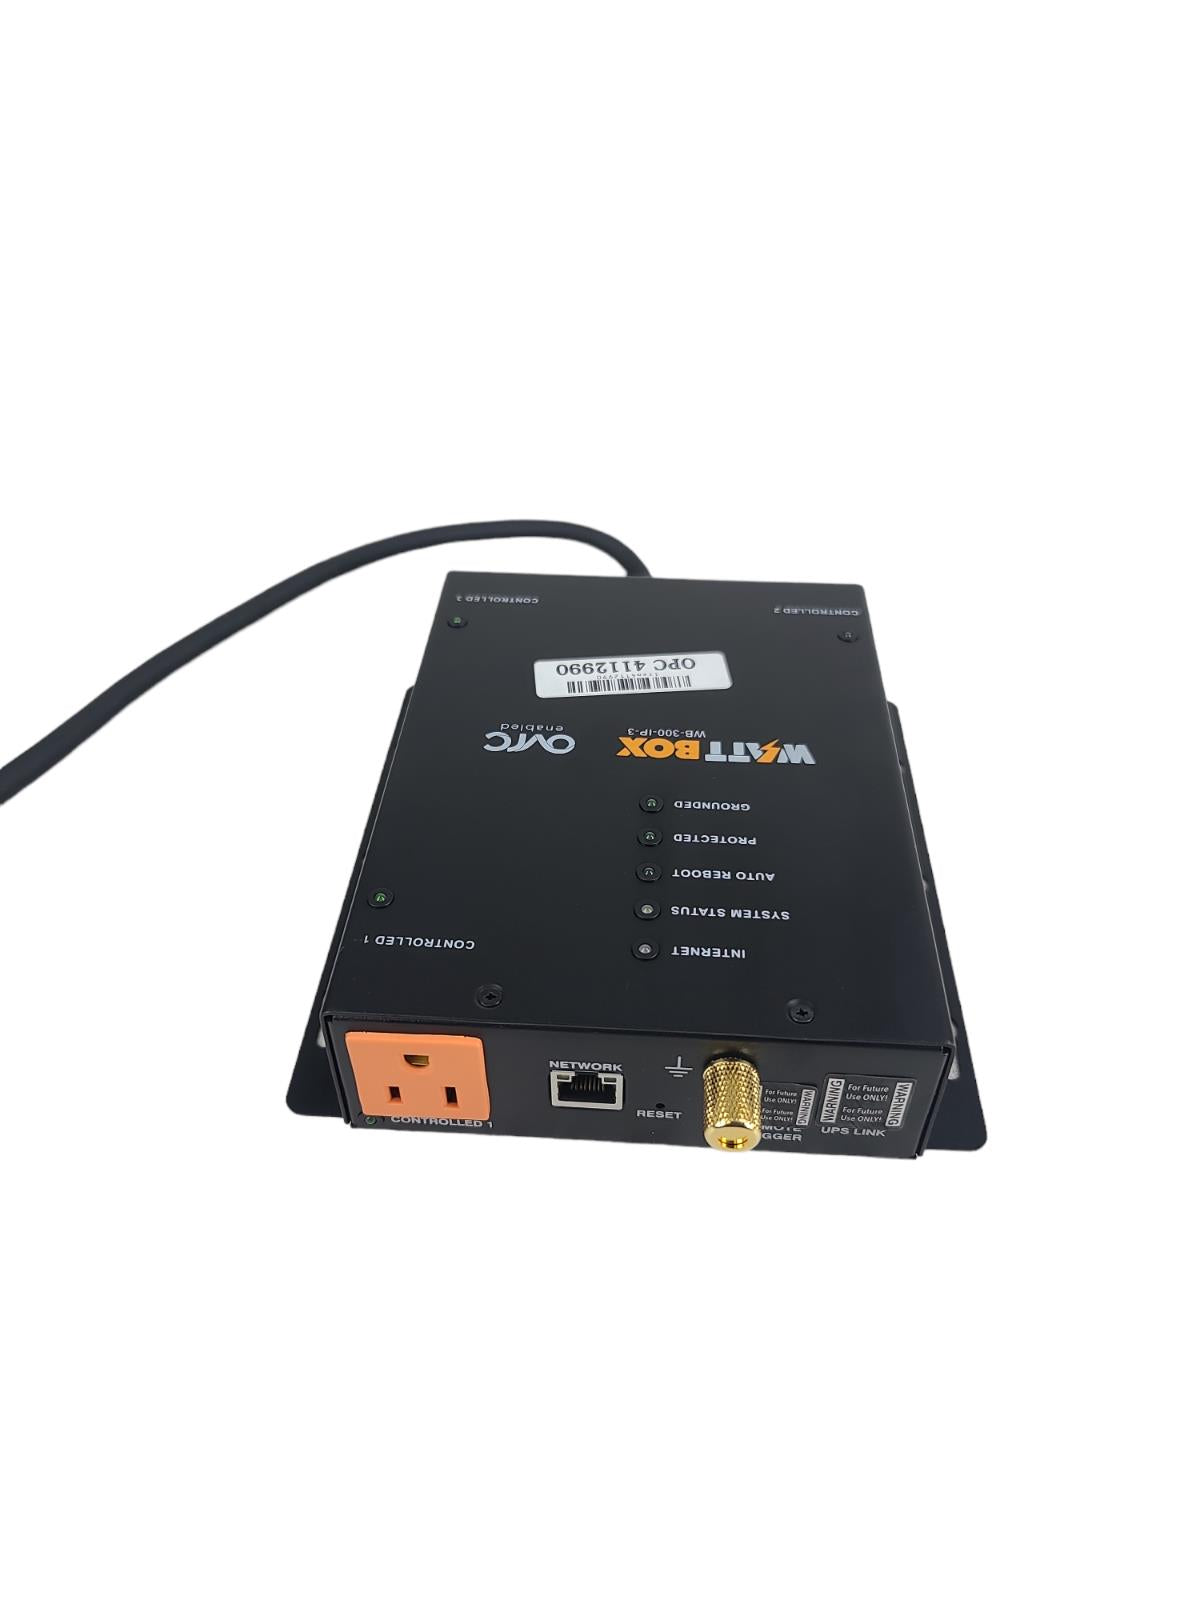 WB-300-IP-3 WATTBOX 3-OUTLET POWER SURGE CONDITIONER